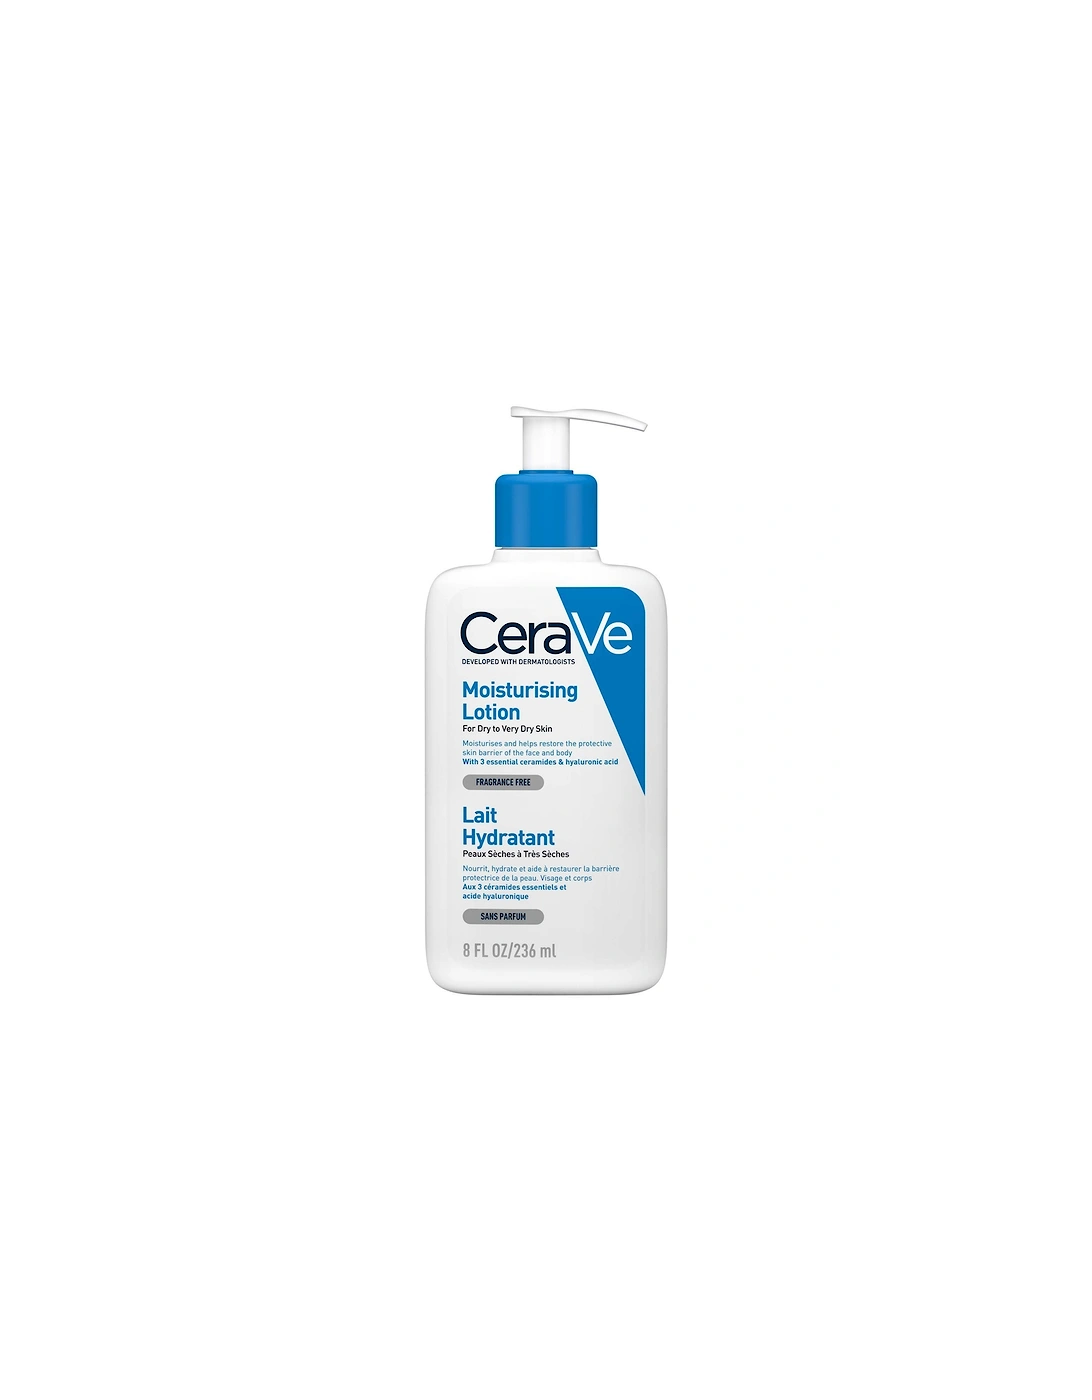 Moisturising Lotion with Ceramides for Dry to Very Dry Skin 236ml - - Moisturising Lotion 236ml - Aamina, 2 of 1